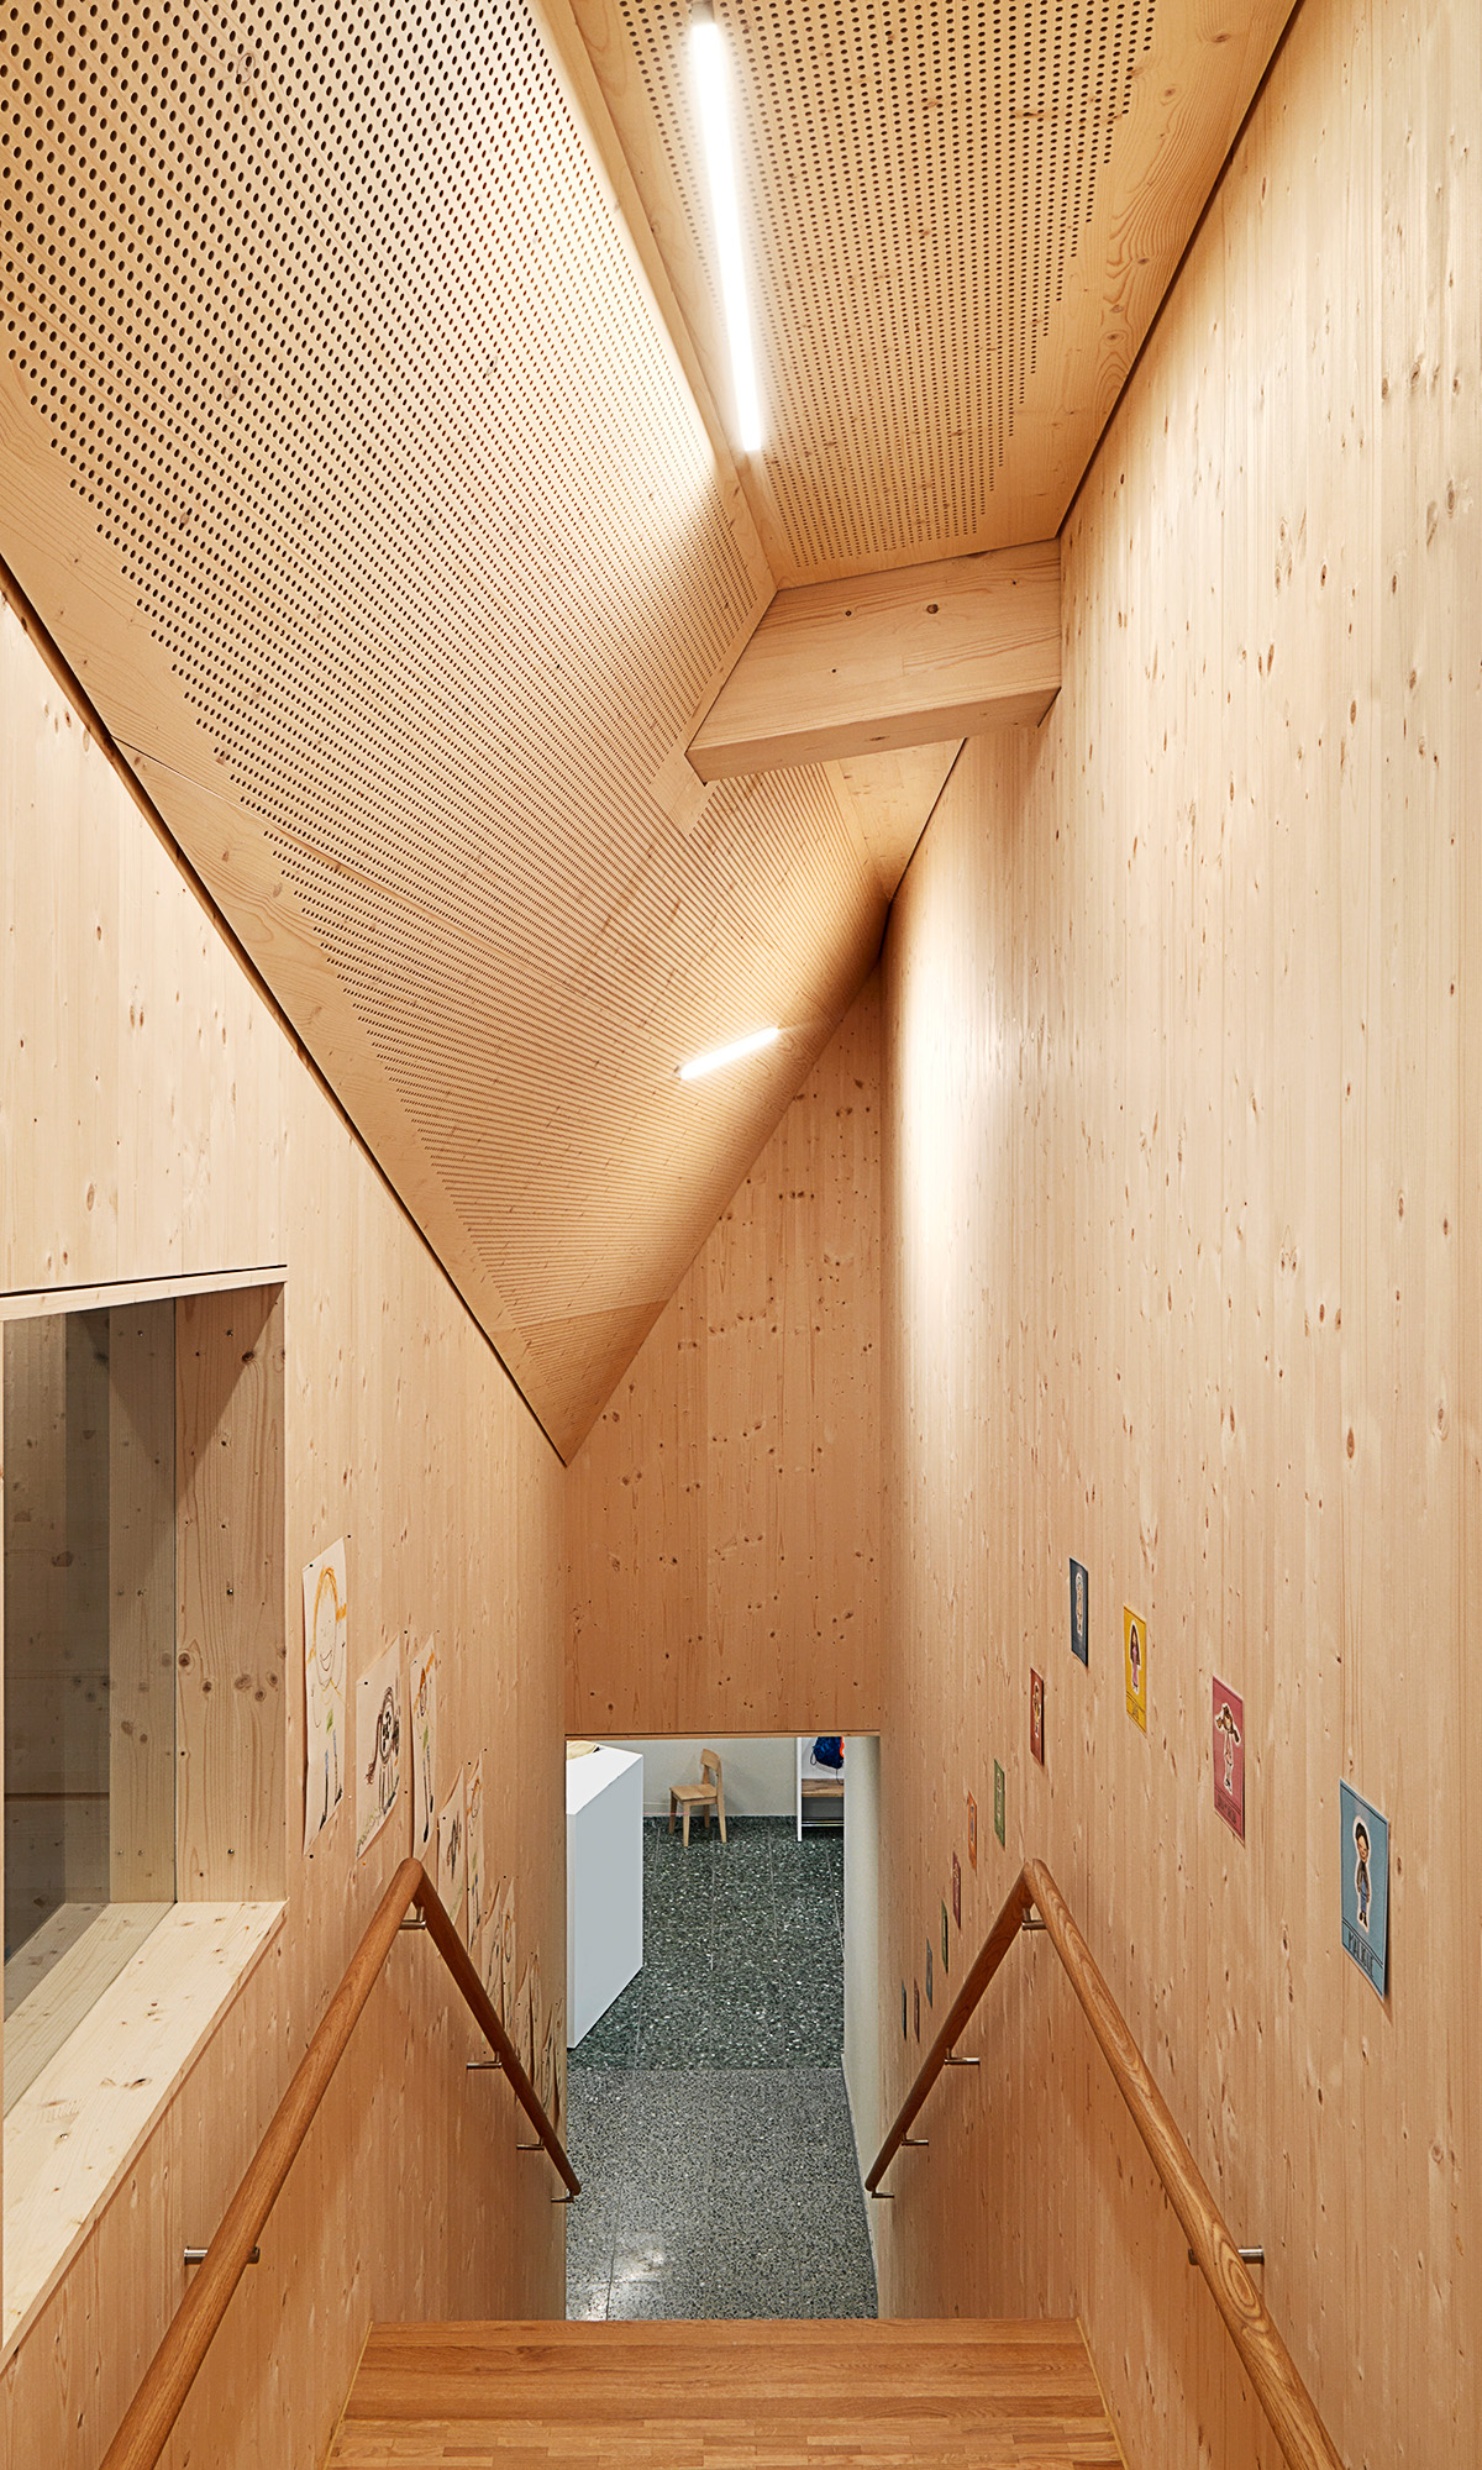 Timber staircase in Wittenbach Kindergarten, which now features a projecting balcony in addition to an extra classroom on the top floor.